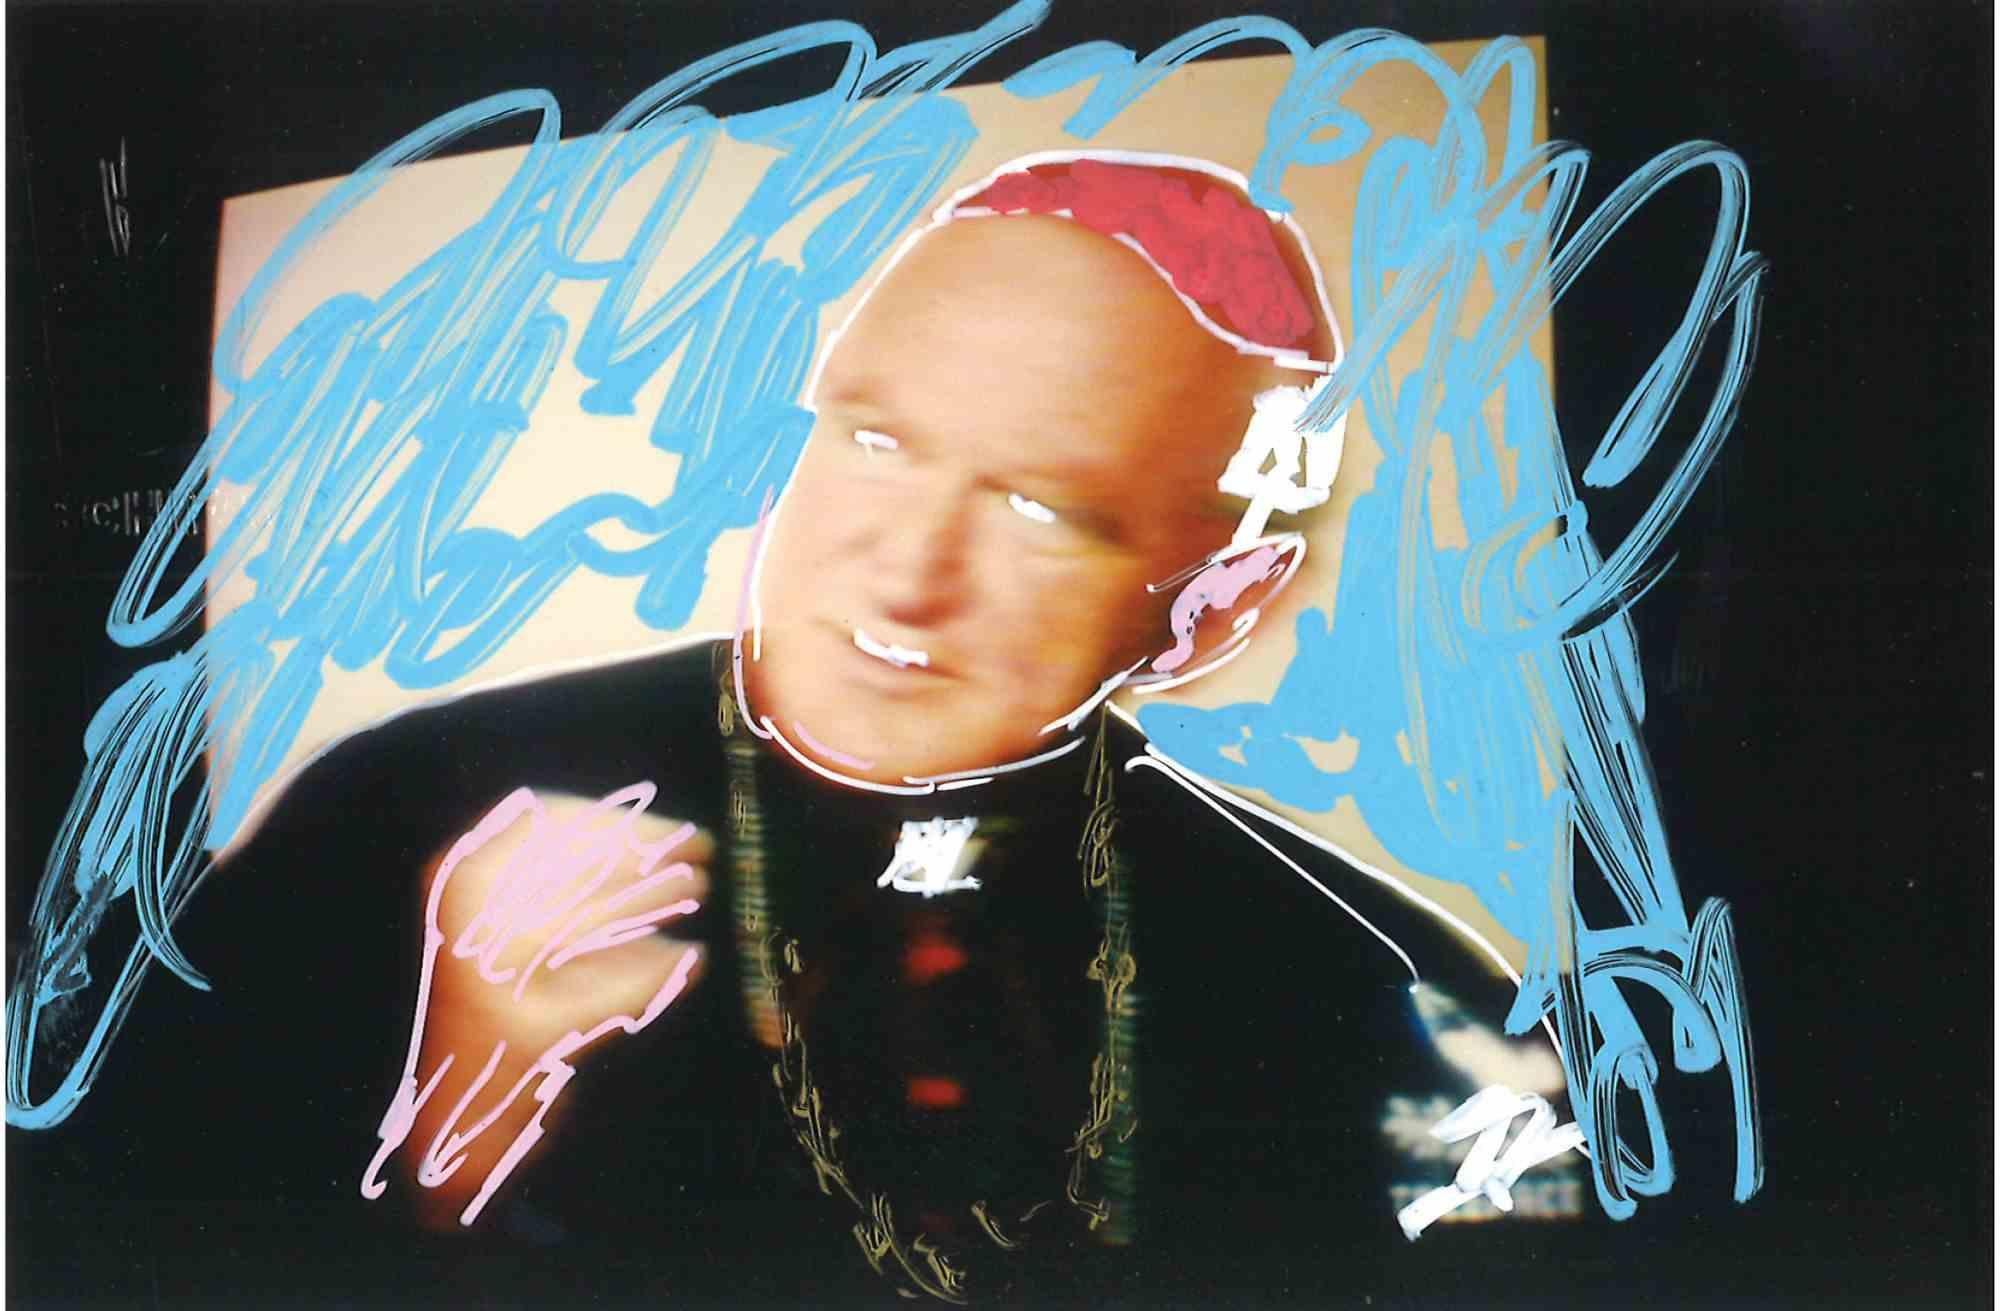 The Cardinal is an  artwork realized by Mario Schifano, in the 1990s.

Mixed Media on Photograph.

cm.10x15 . 

Monogrammed on the back.

Good conditions

 

Mario Schifano (Homs, September 20, 1934 - Rome, January 26, 1998) was an Italian painter